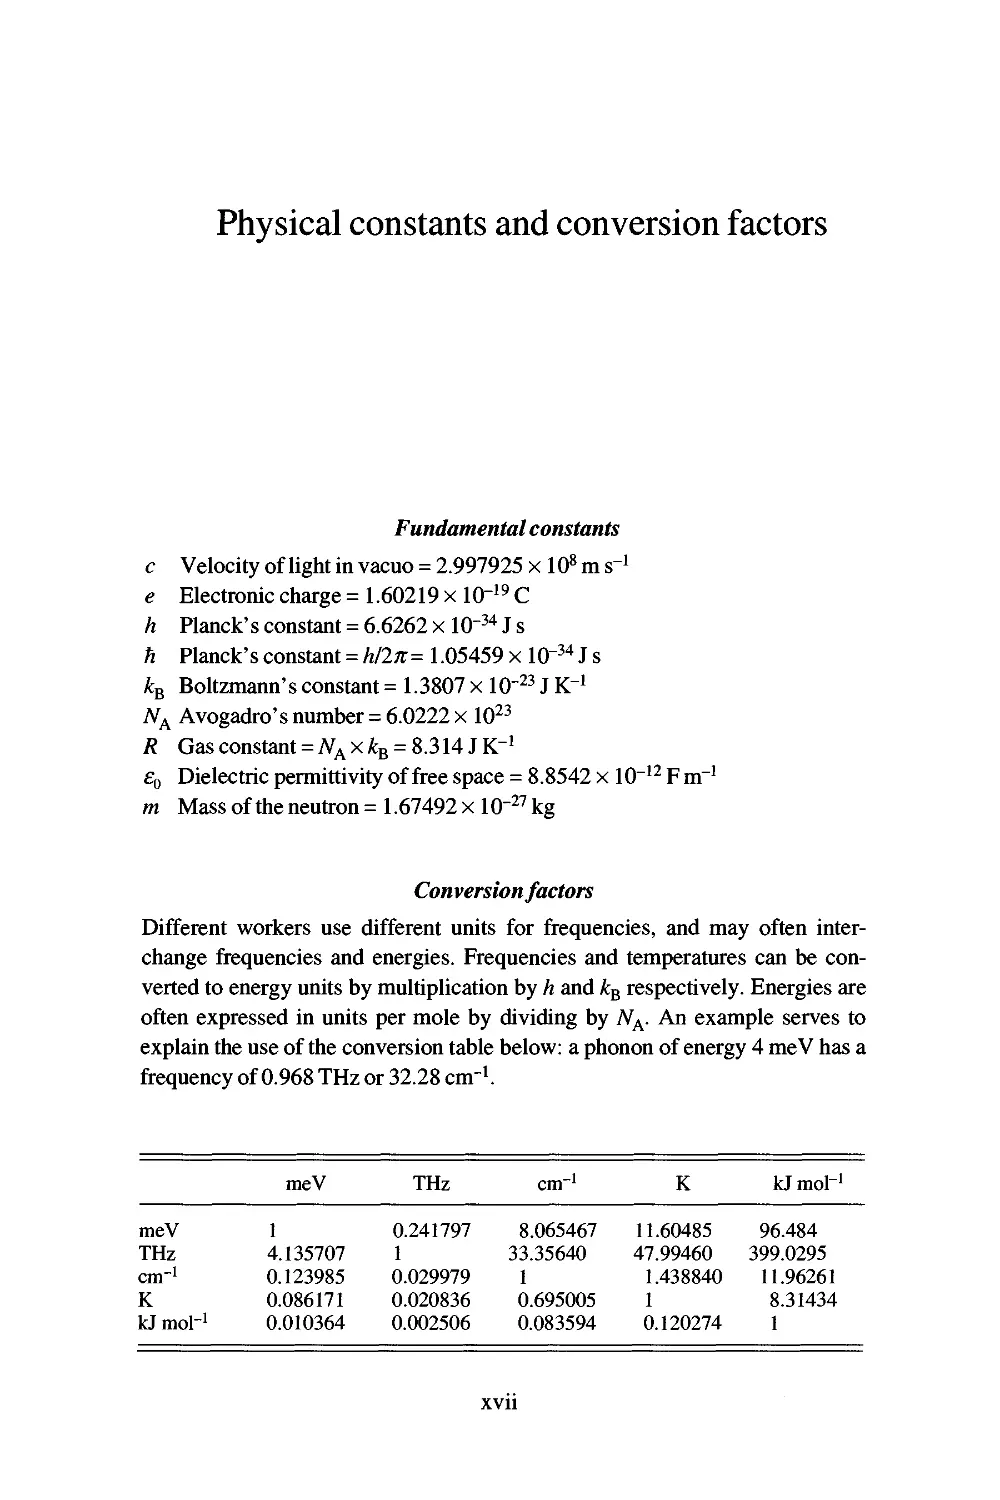 Physical constants and conversion factors